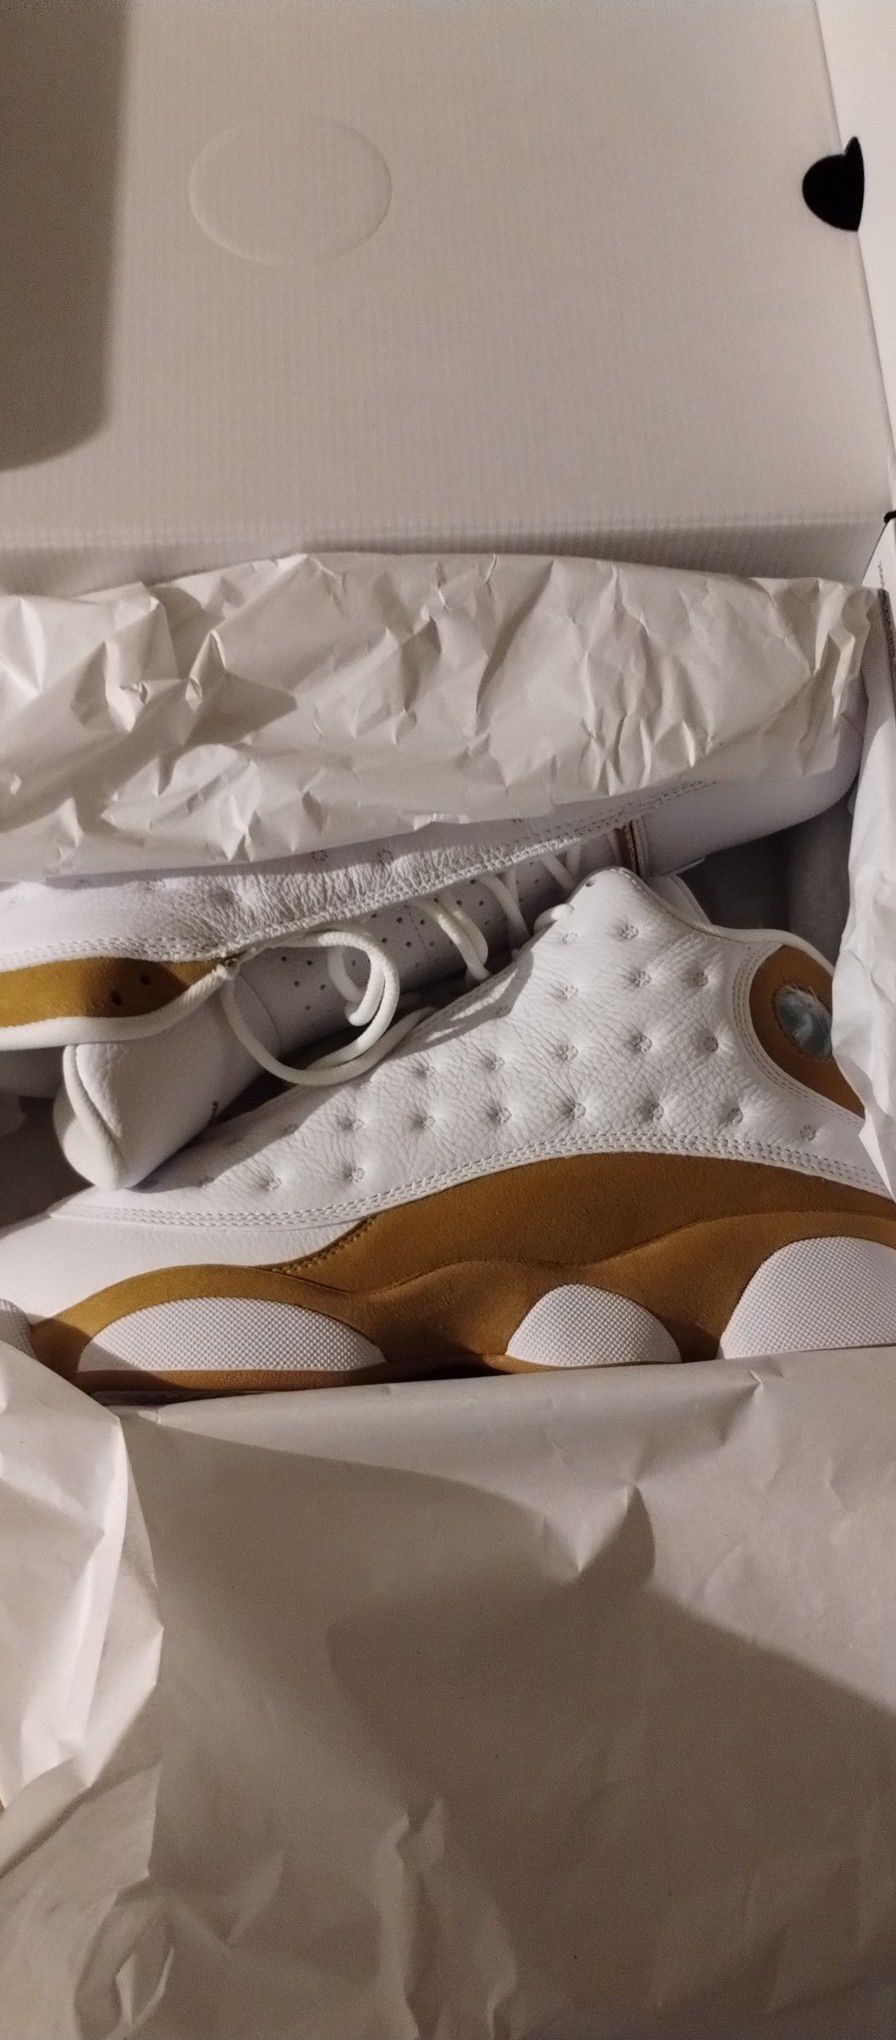 Brand new retro Jordan 13's Whit And Tan mens size  11 And 10.5